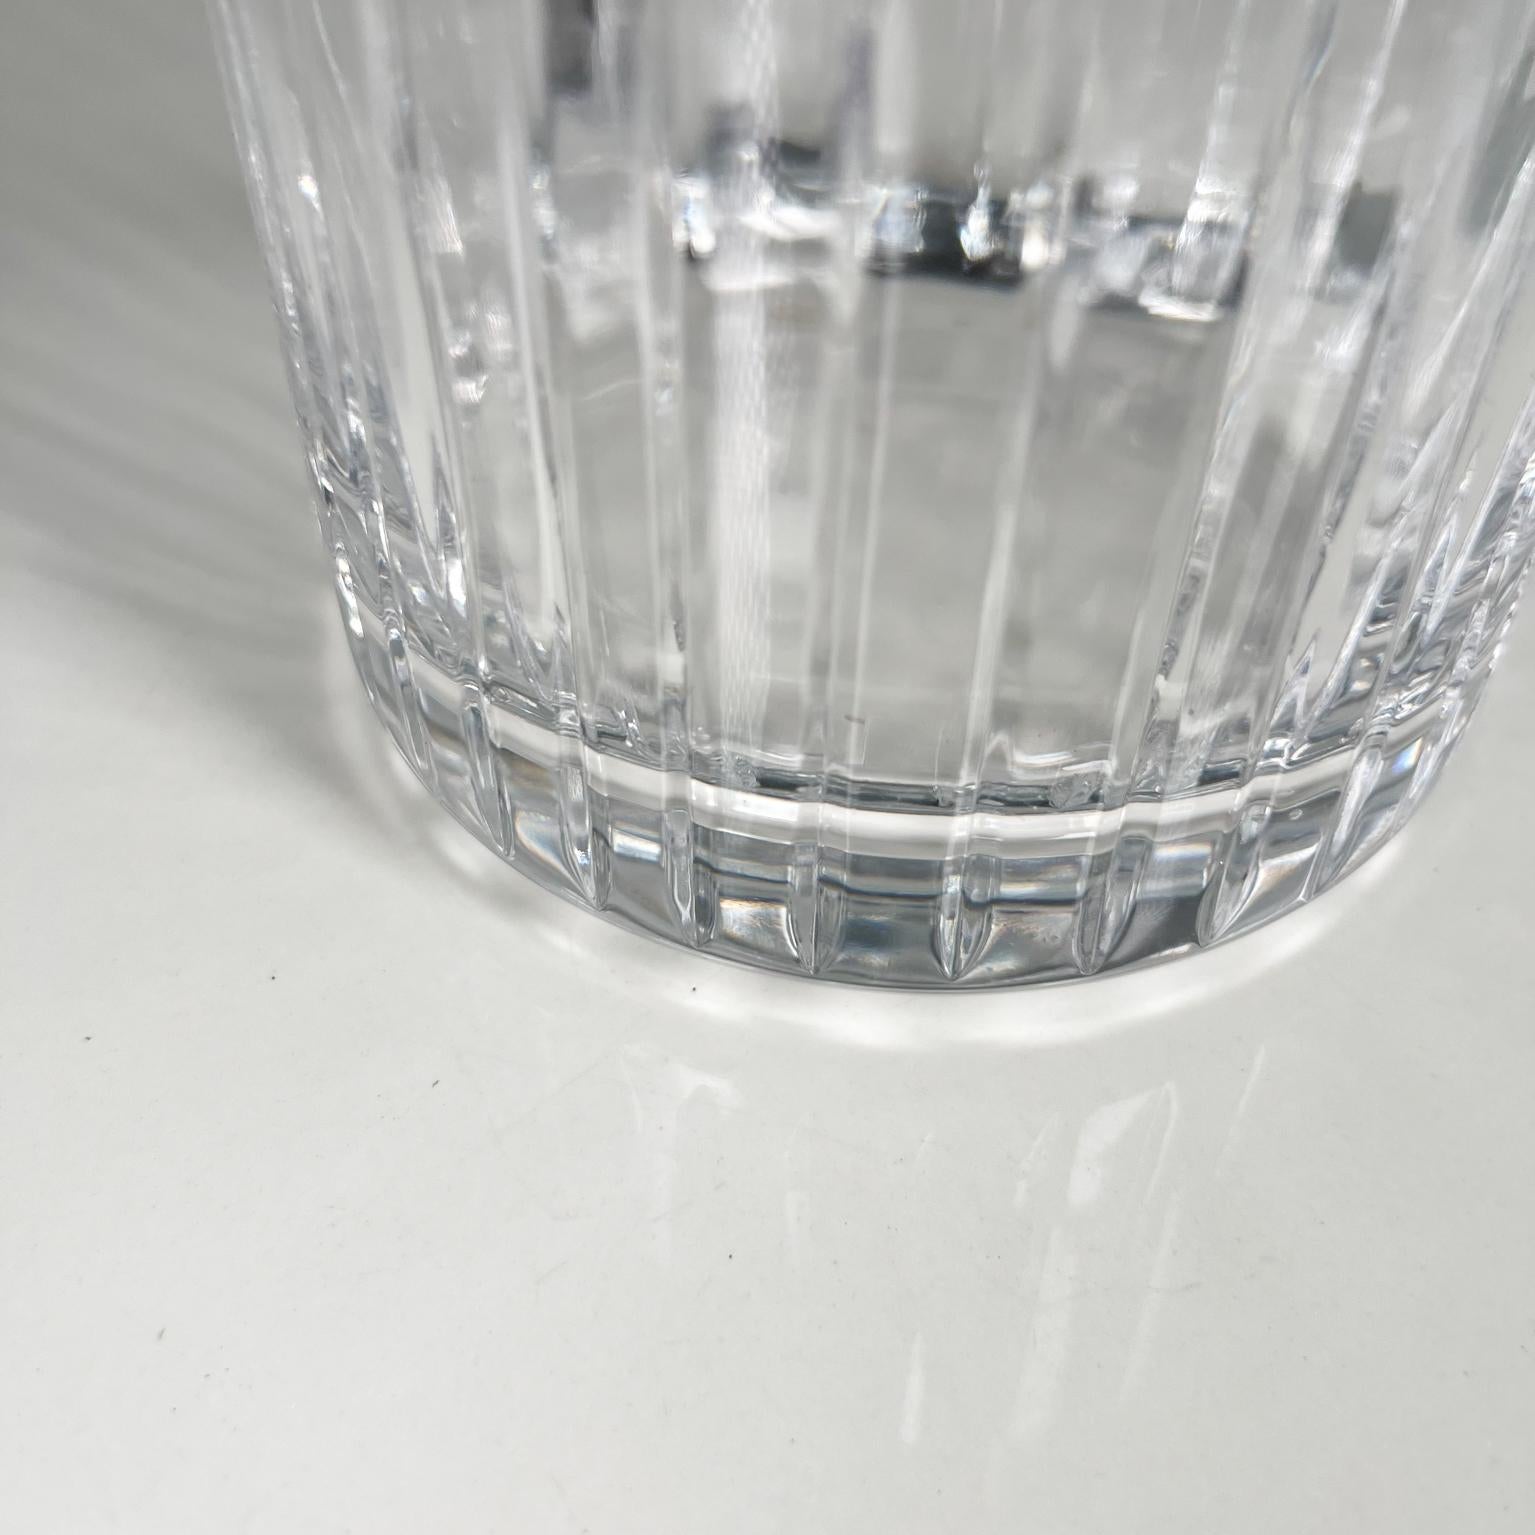 Metal 1960s Modernist Ribbed Crystal Glass Ice Bucket from Italy For Sale